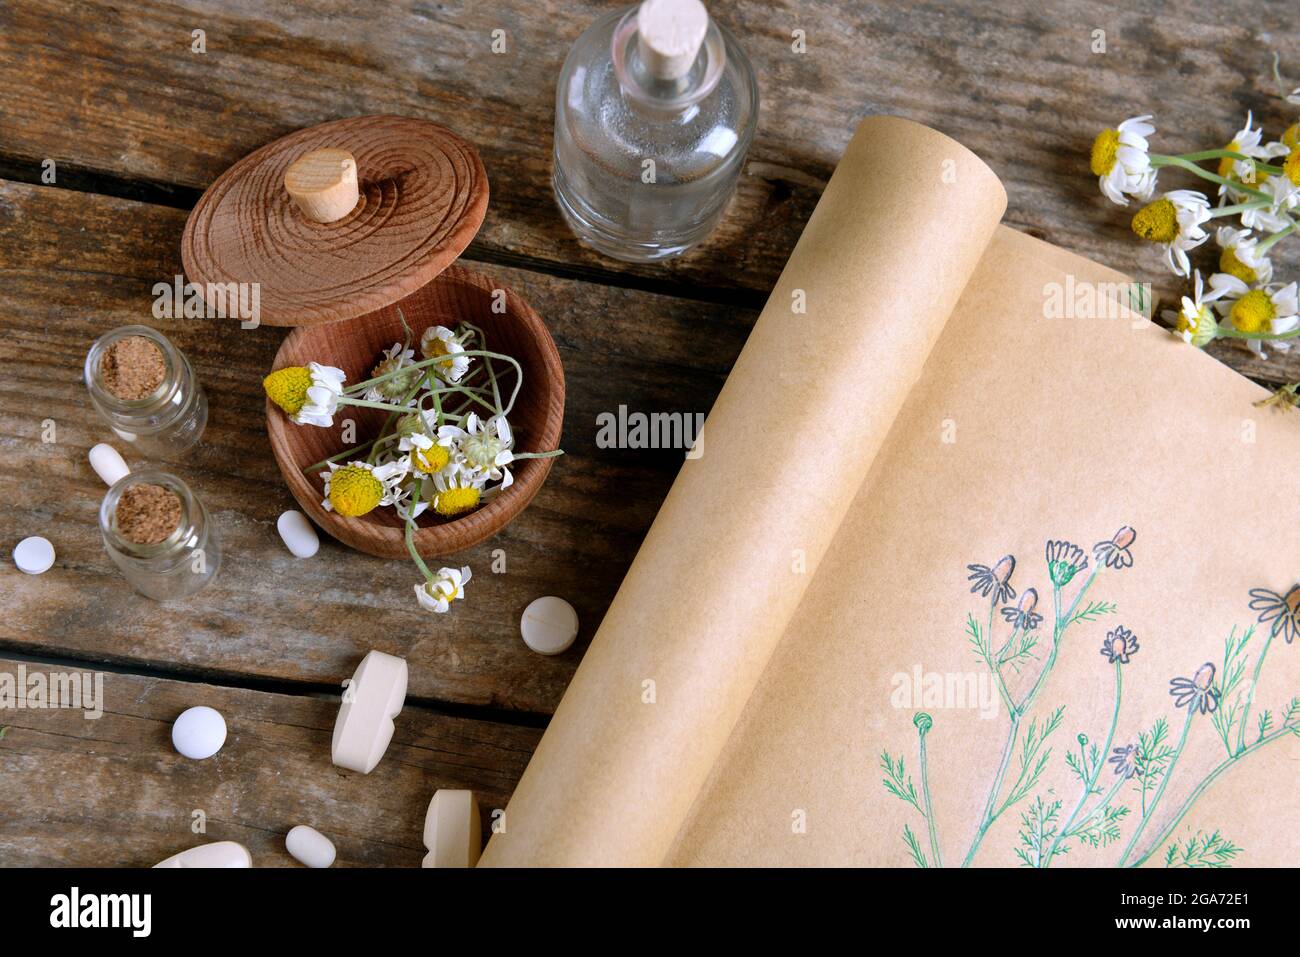 Old book with dry flowers in mortar on table close up Stock Photo